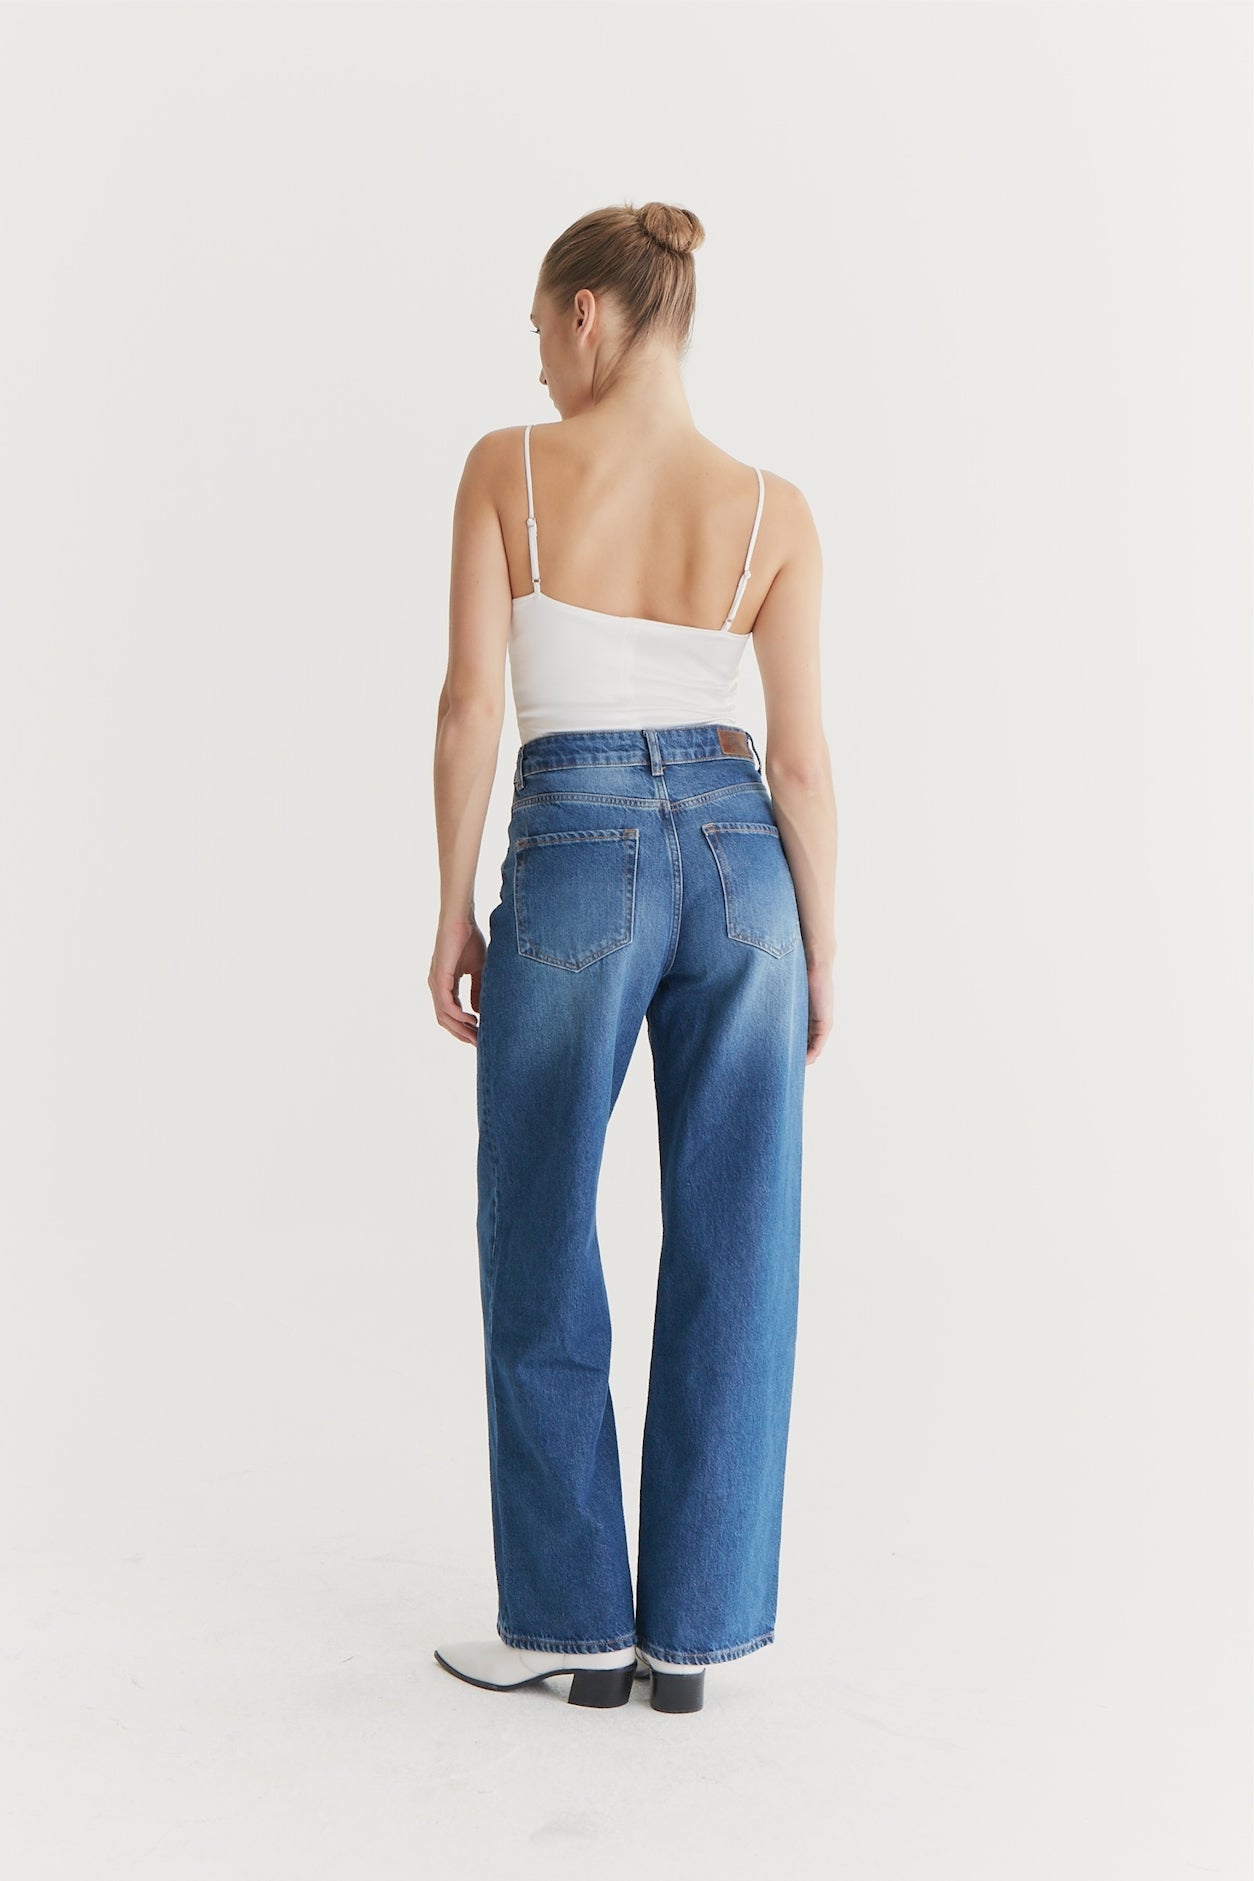 Maria - Wide Leg Jeans - Astra Blue